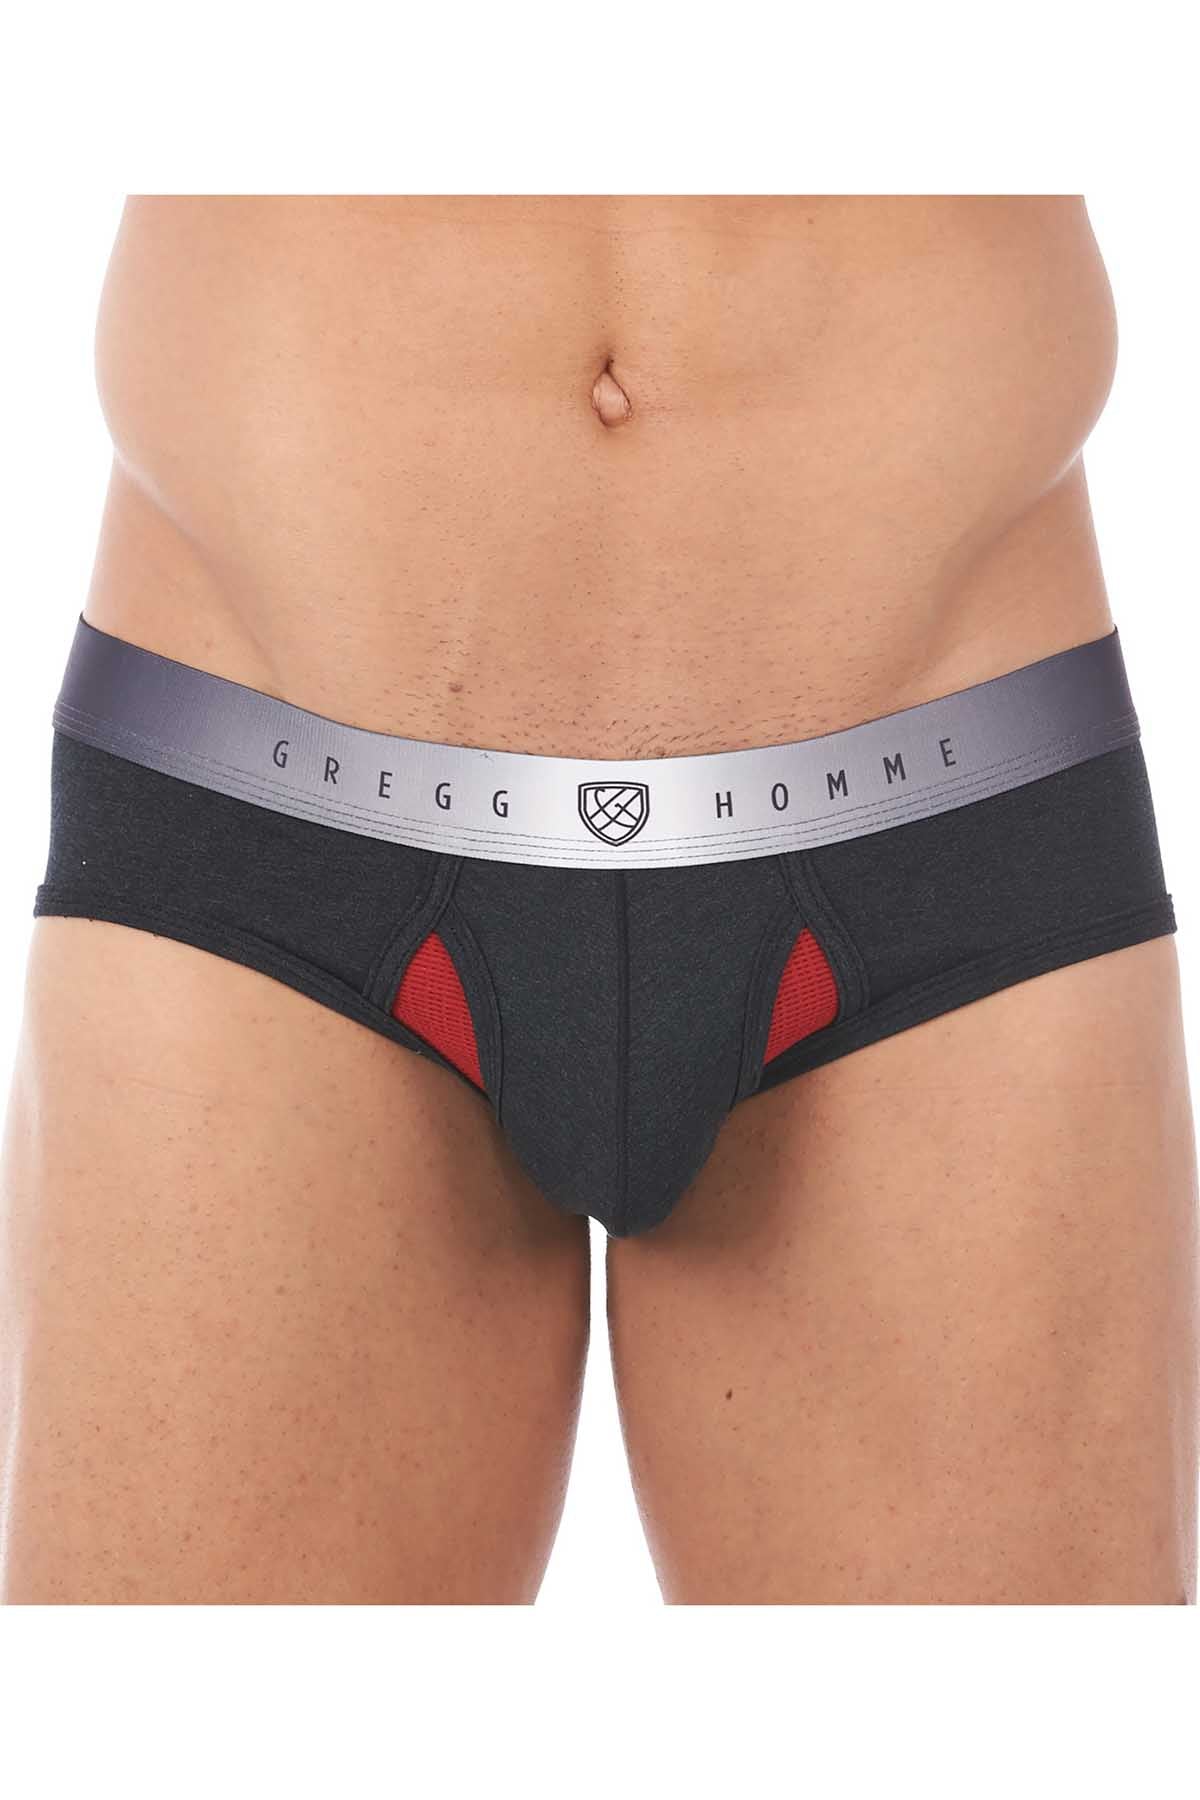 Gregg Homme Charcoal Heat Mesh Brief